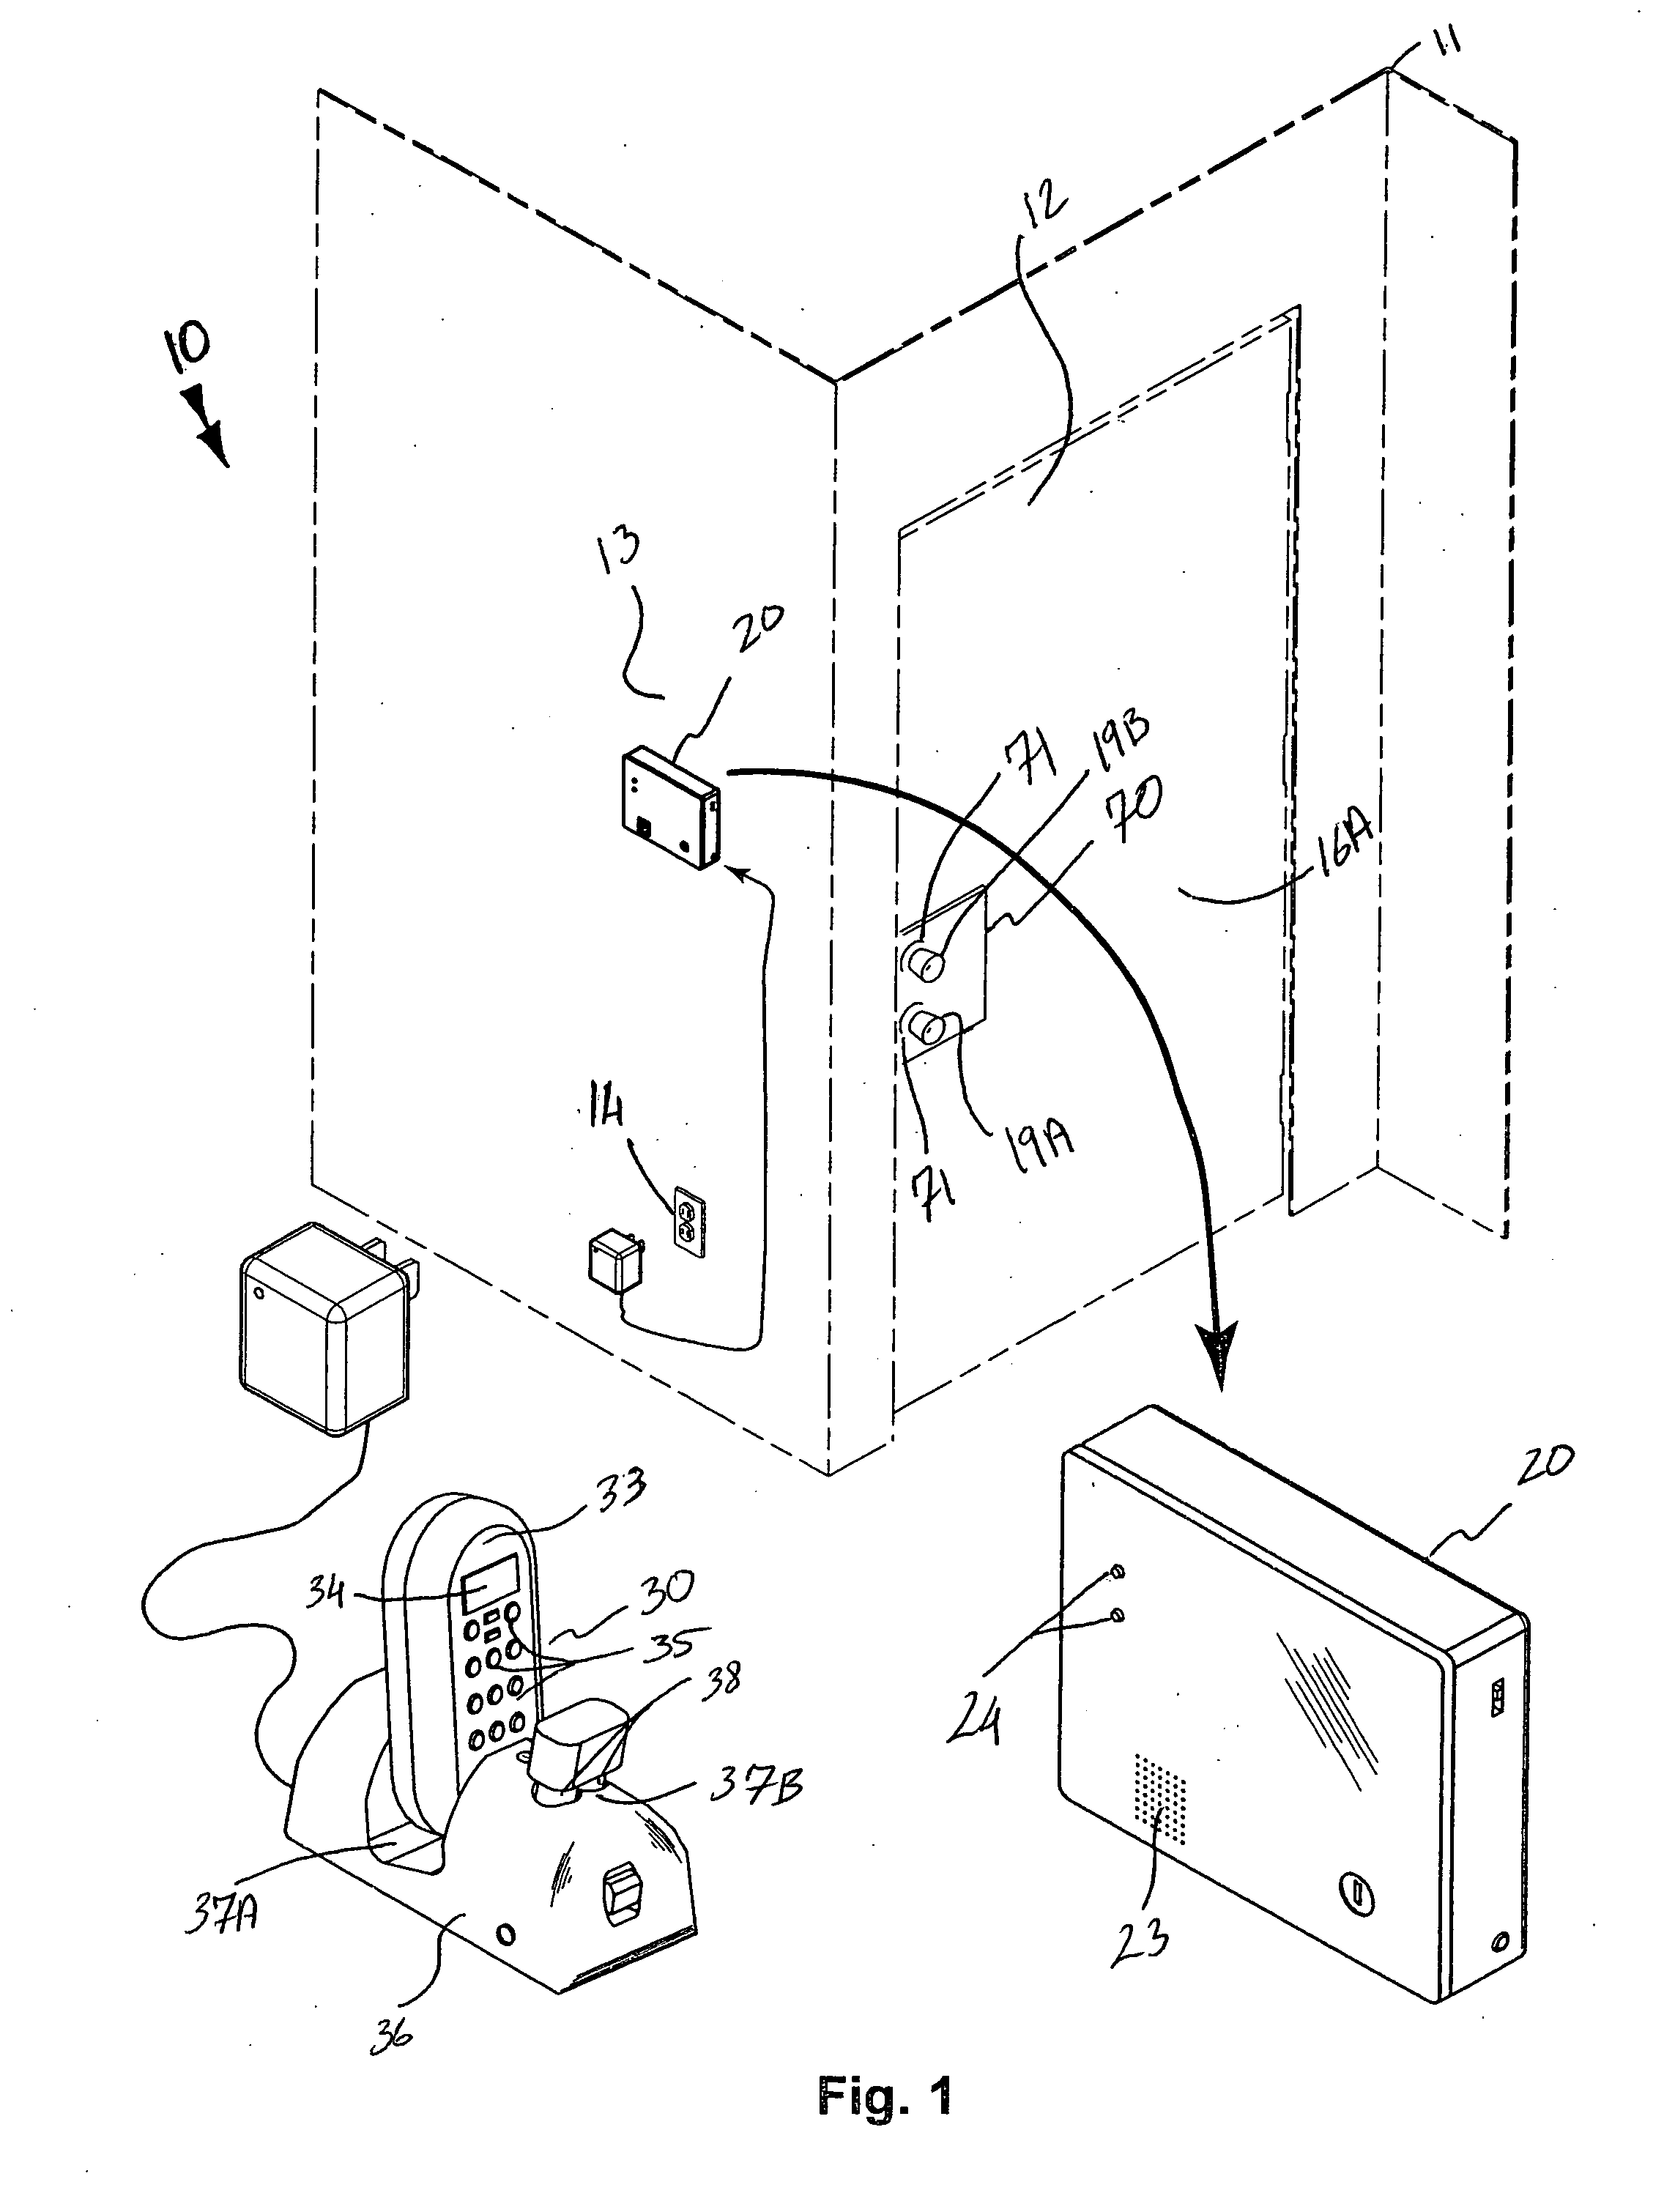 Remotely operable door lock interface system